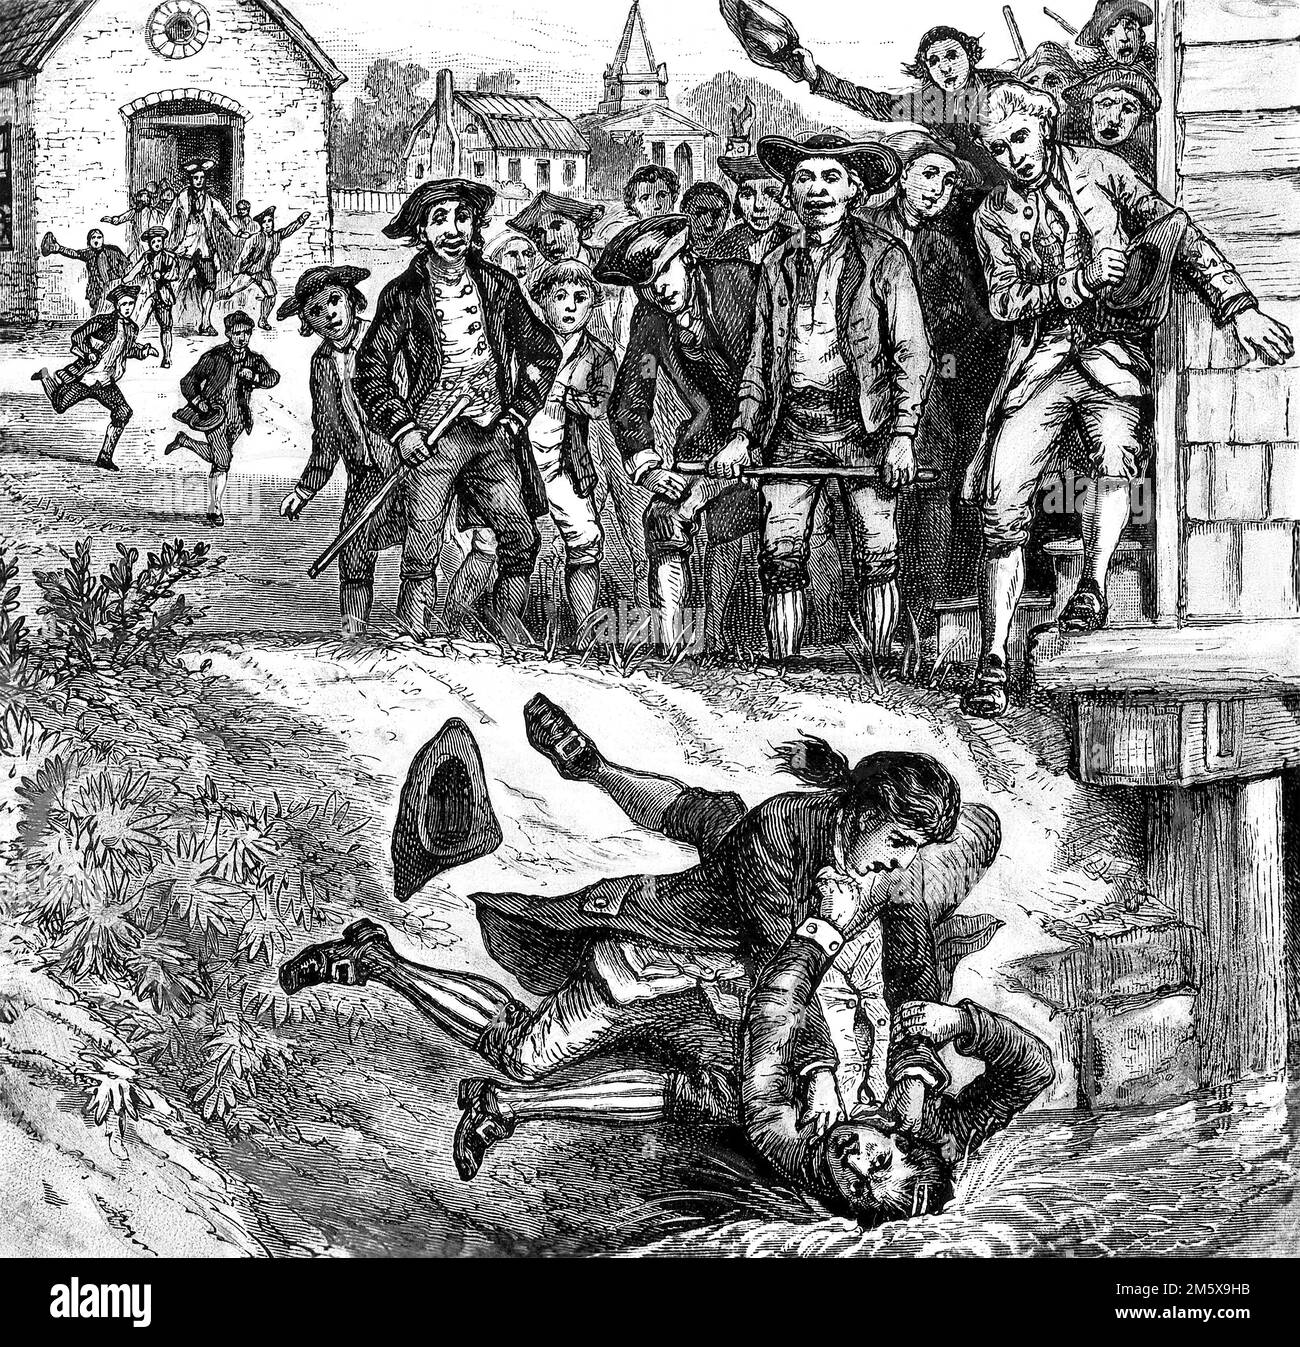 Shays' Rebellion. An 1881 illustration of Daniel Shays' protesters taking down a tax collector in 1787 Stock Photo